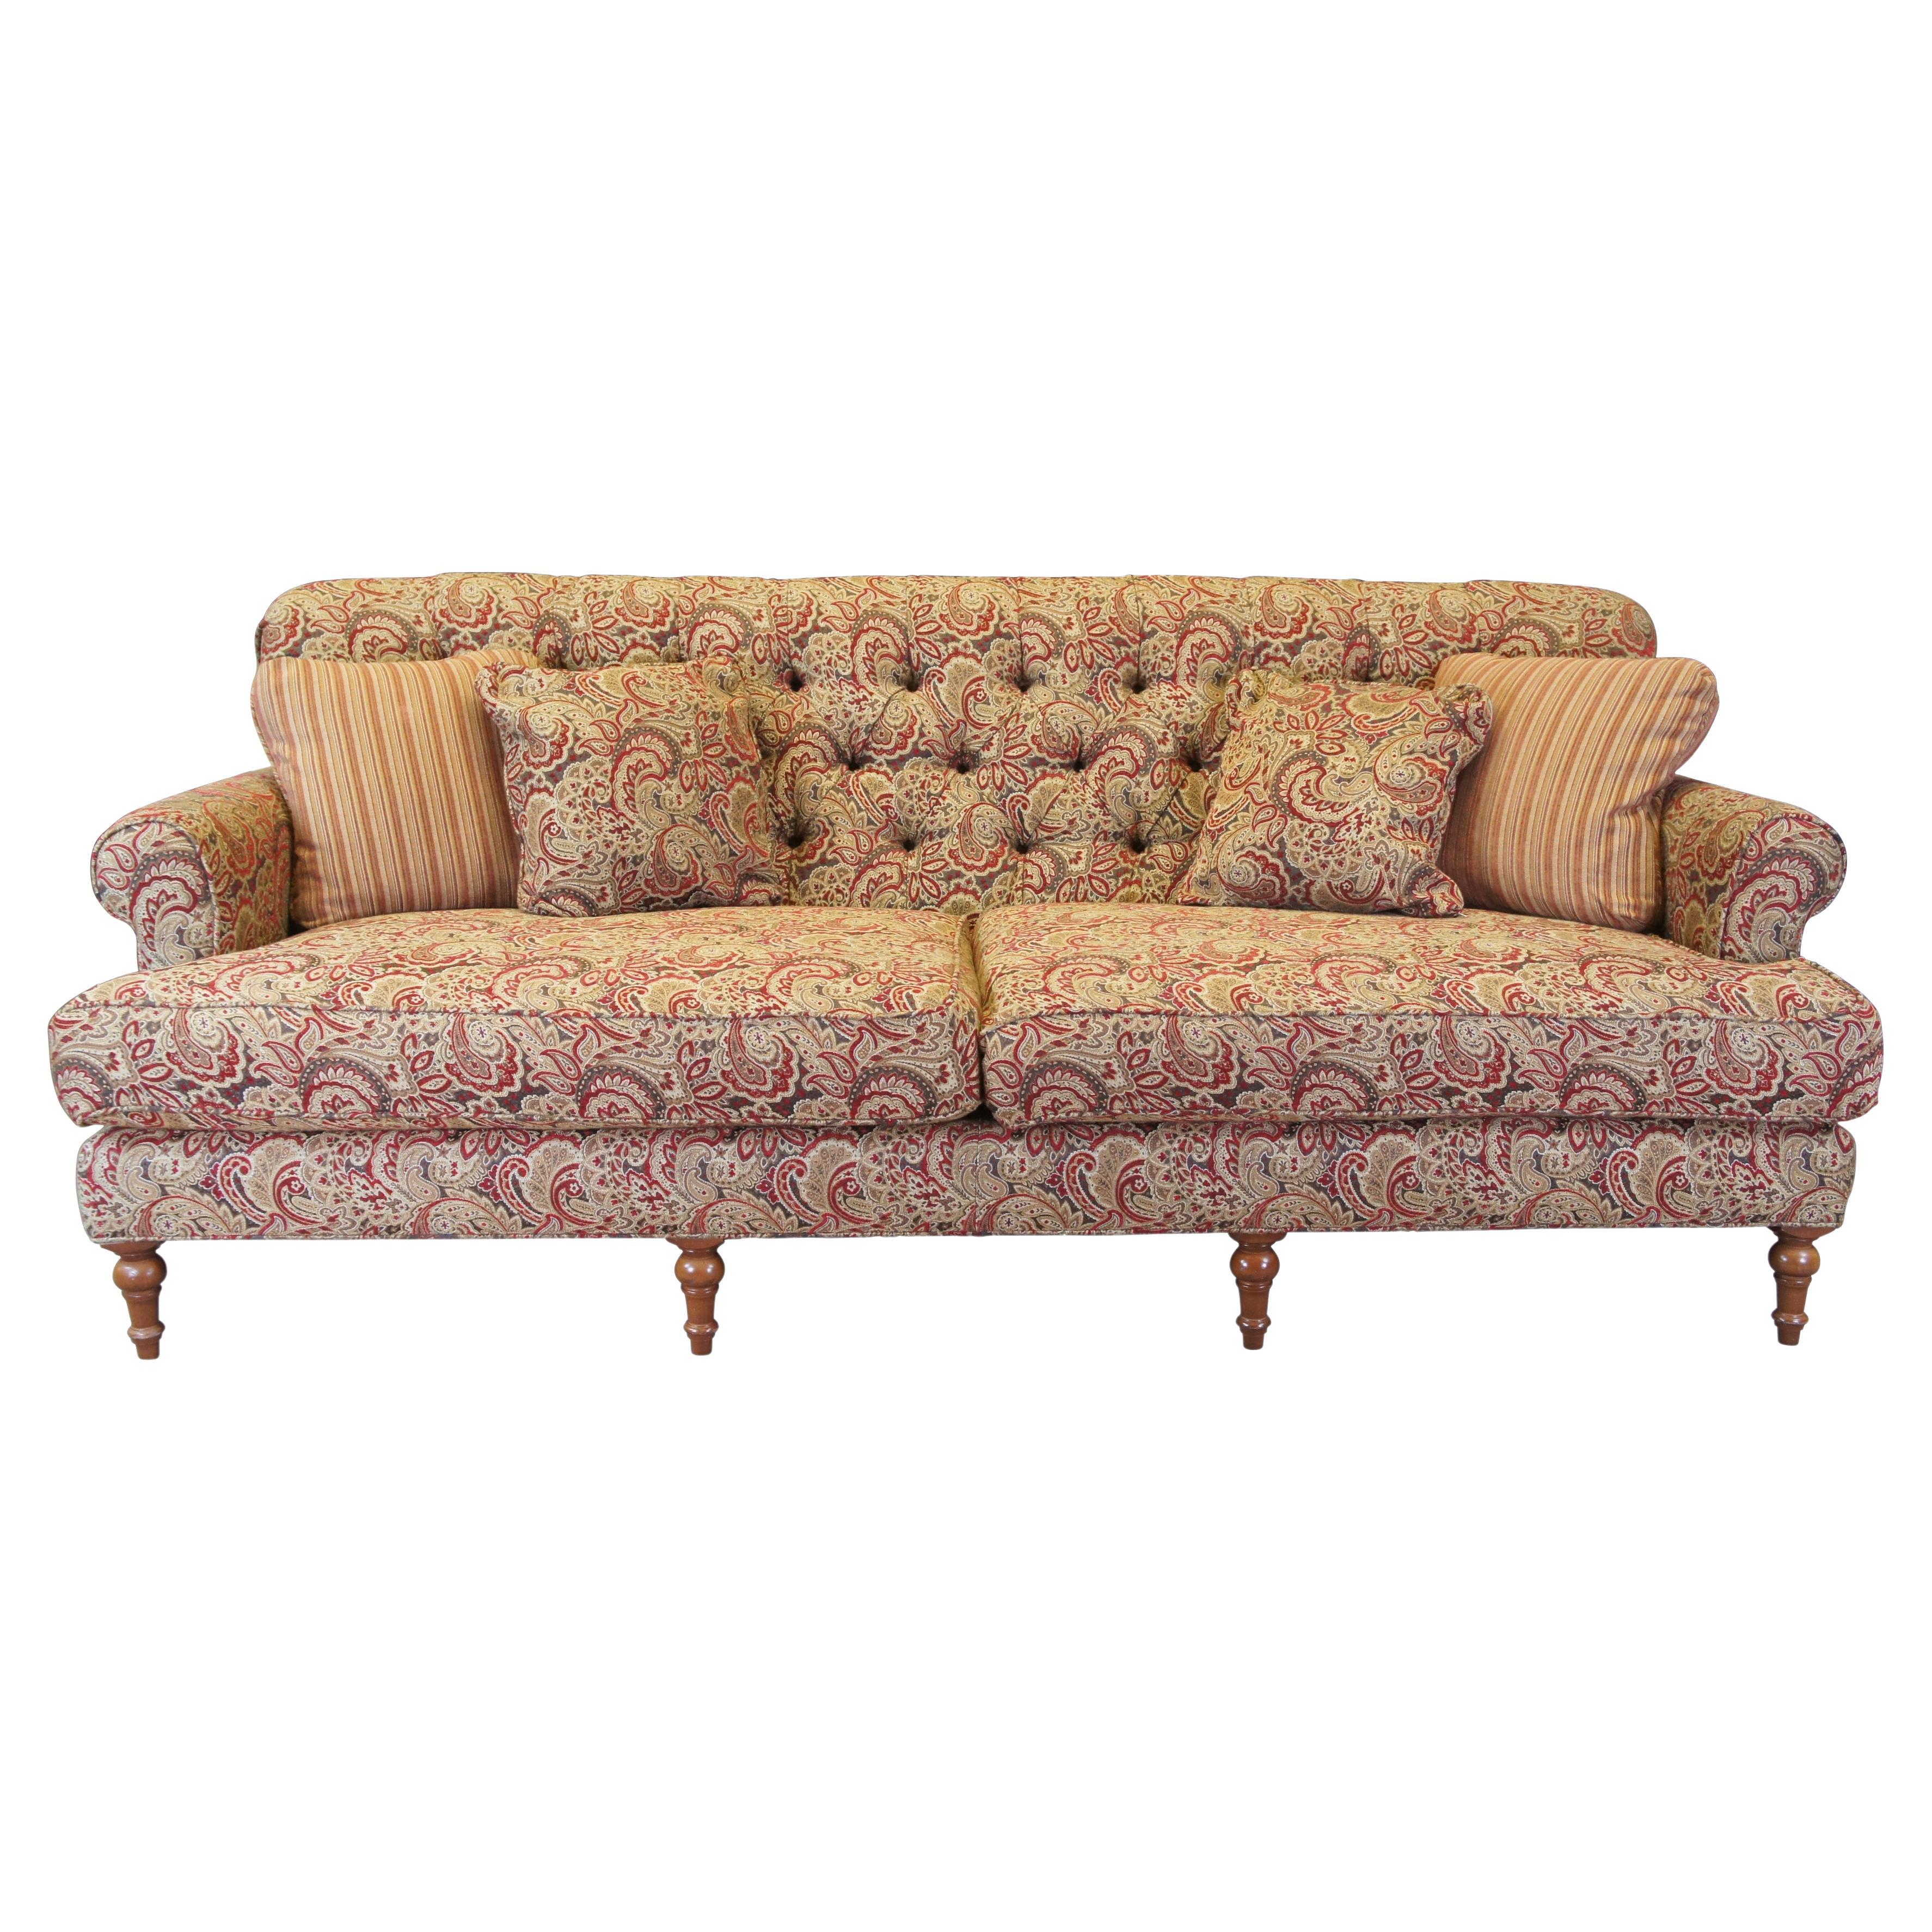 https://a.1stdibscdn.com/vintage-arhaus-cambridge-collection-tufted-paisley-upholstered-sofa-couch-97-for-sale/f_53432/f_318560221671626855057/f_31856022_1671626856667_bg_processed.jpg